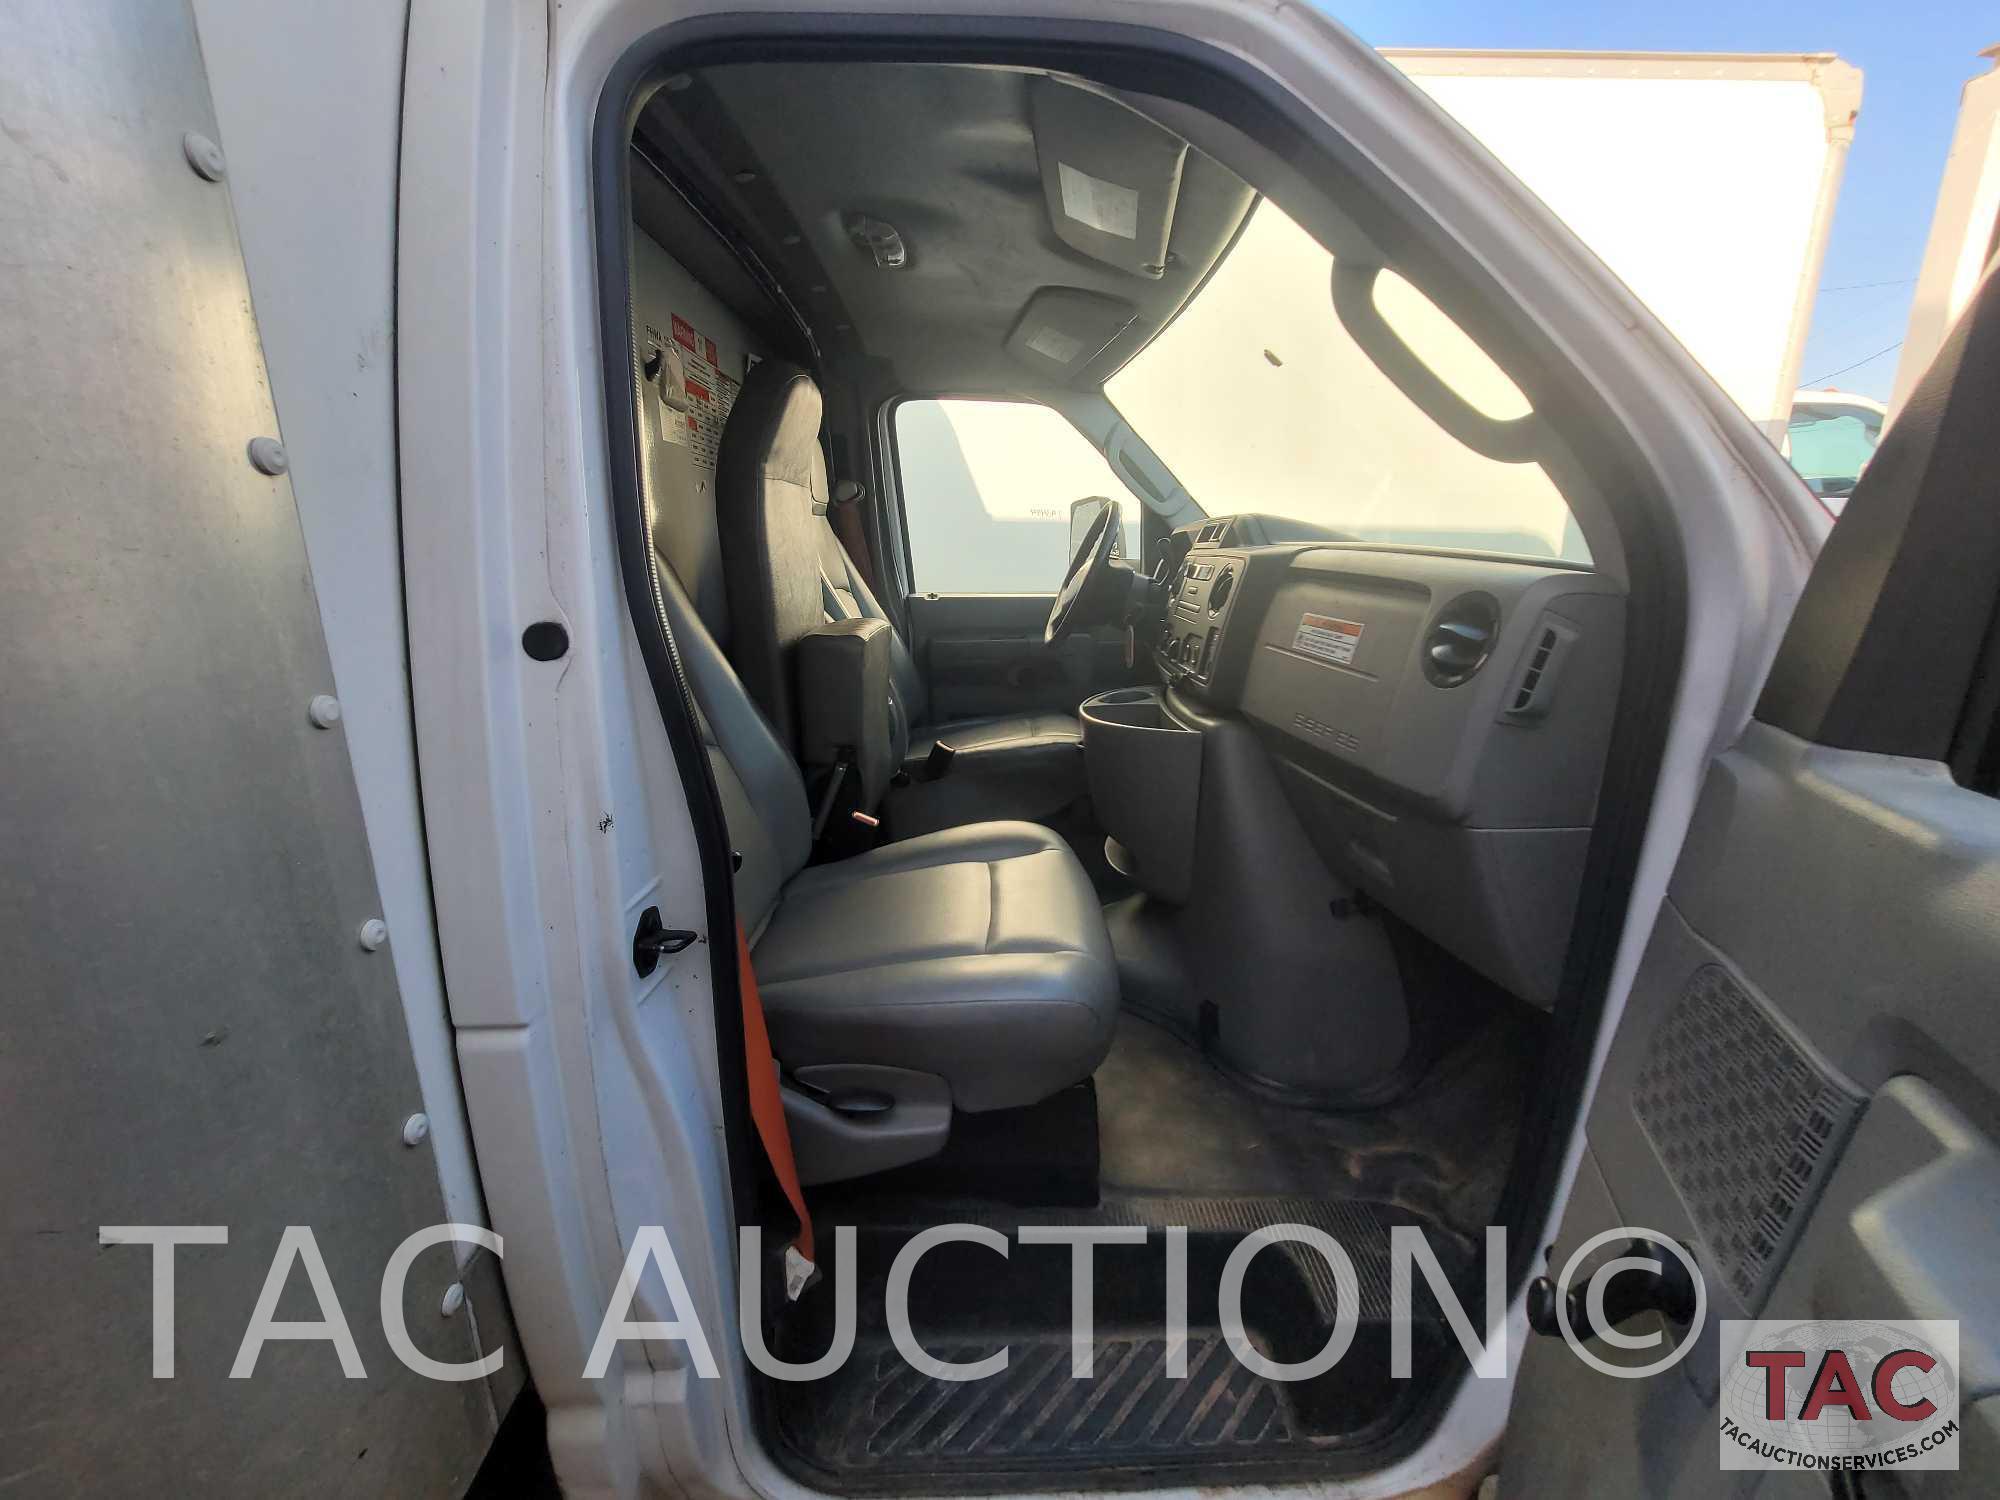 2017 Ford E-350 16ft Box Truck